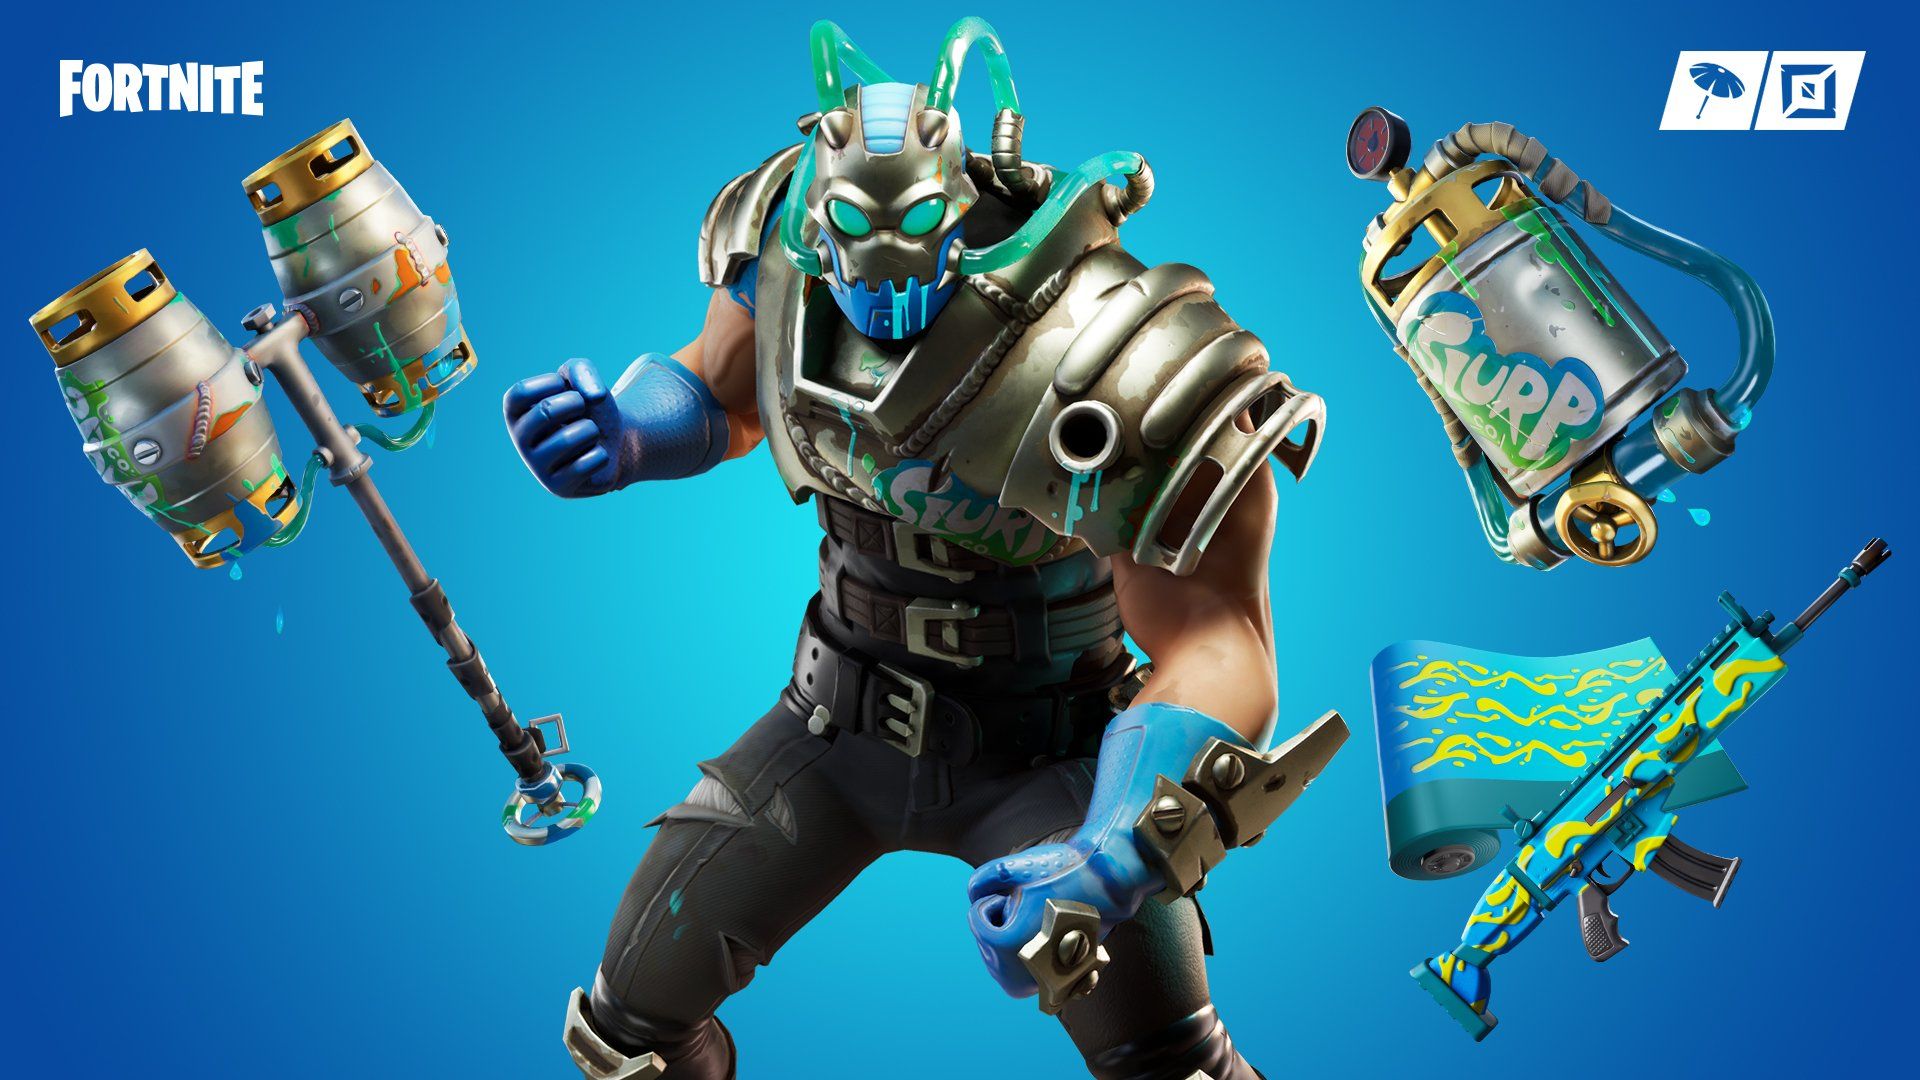 Fueled By Slurp Juice. Grab The New Big Chuggus Outfit And The Rest Of The Slurp Squad Set In The Item Shop Now!pic.twitter.com Av52qmVrfN